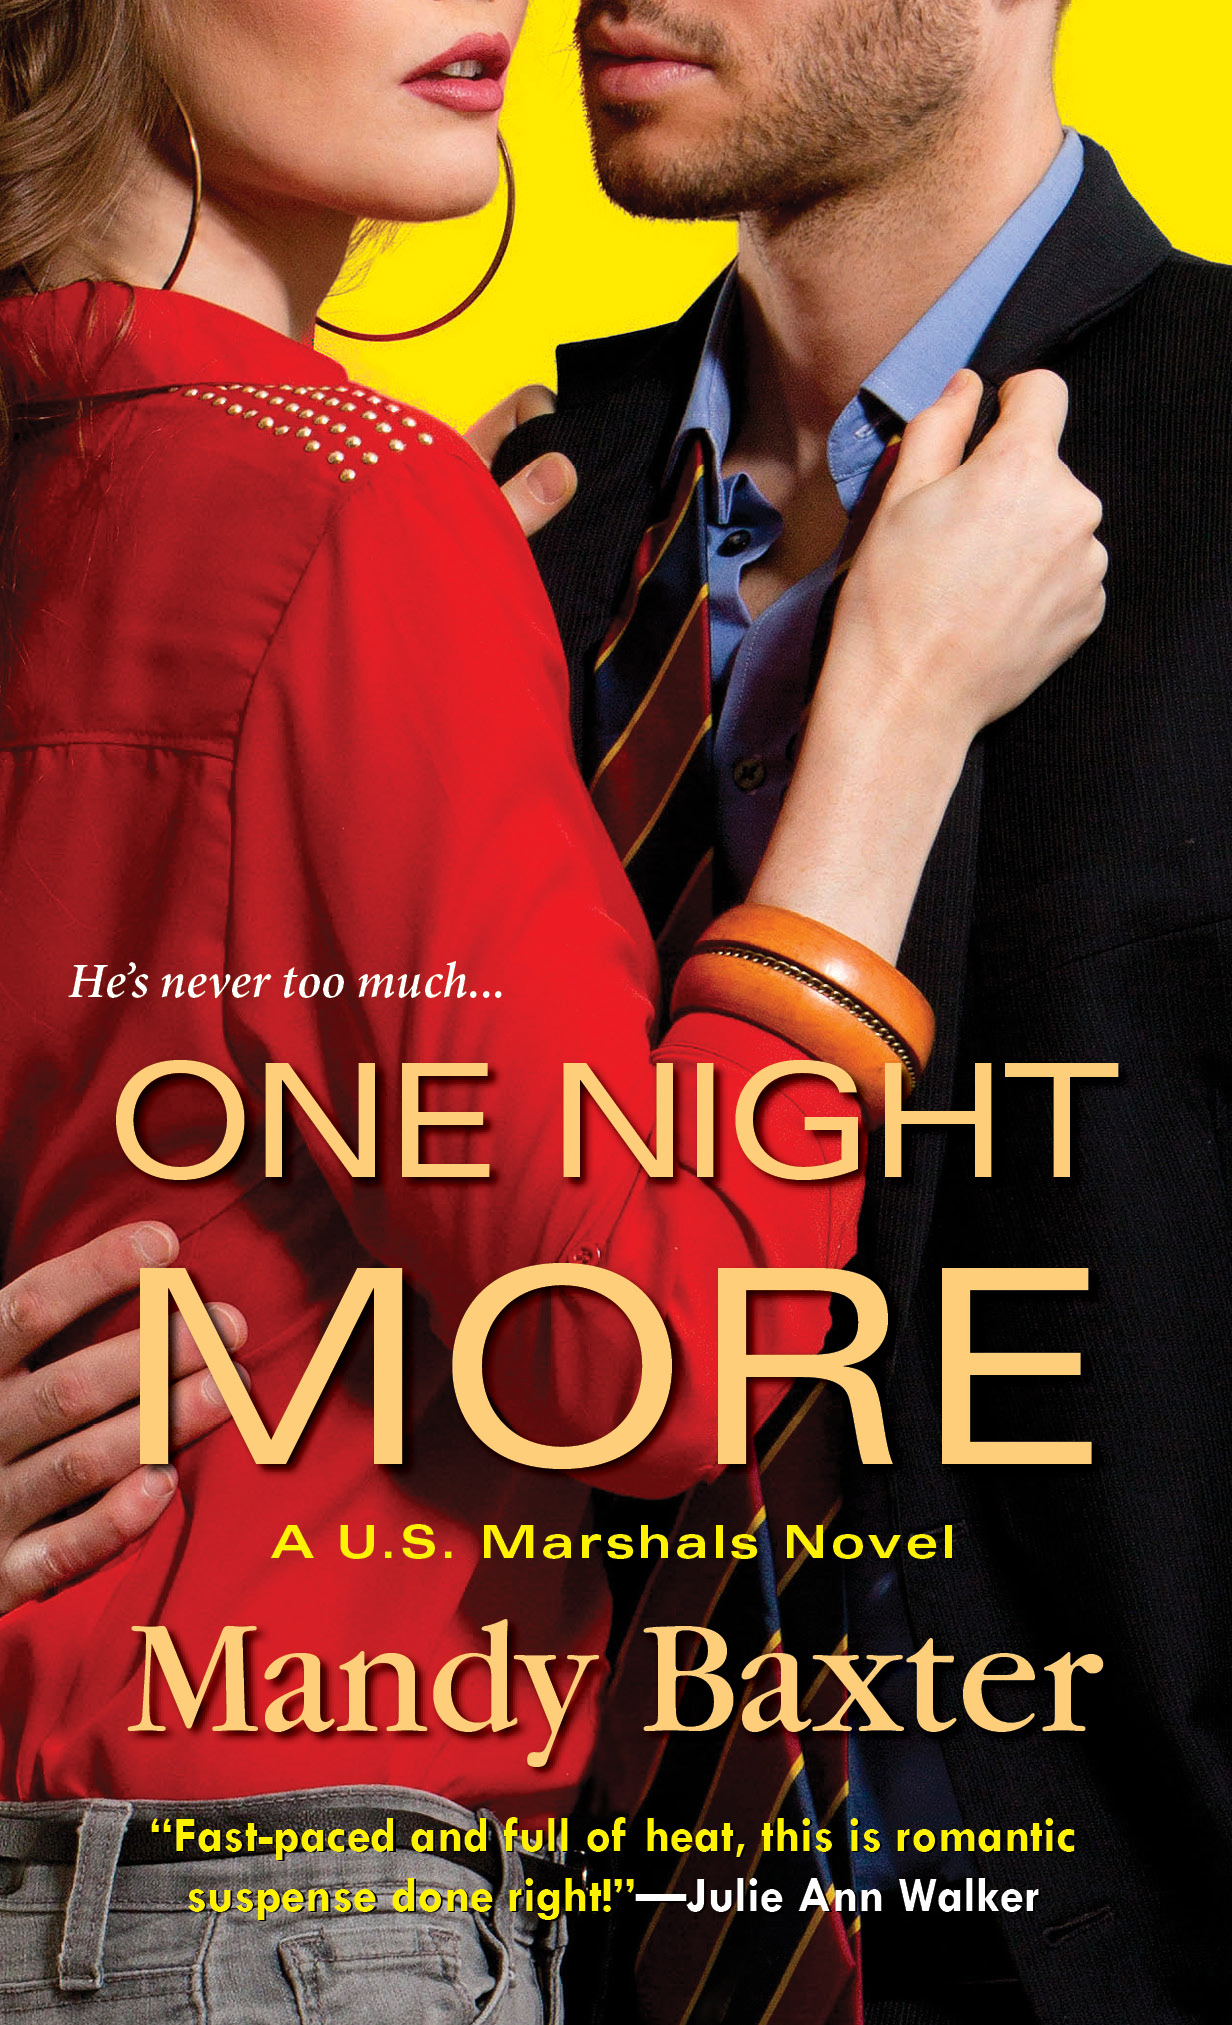 Book Cover for One Night More by Mandy Baxter